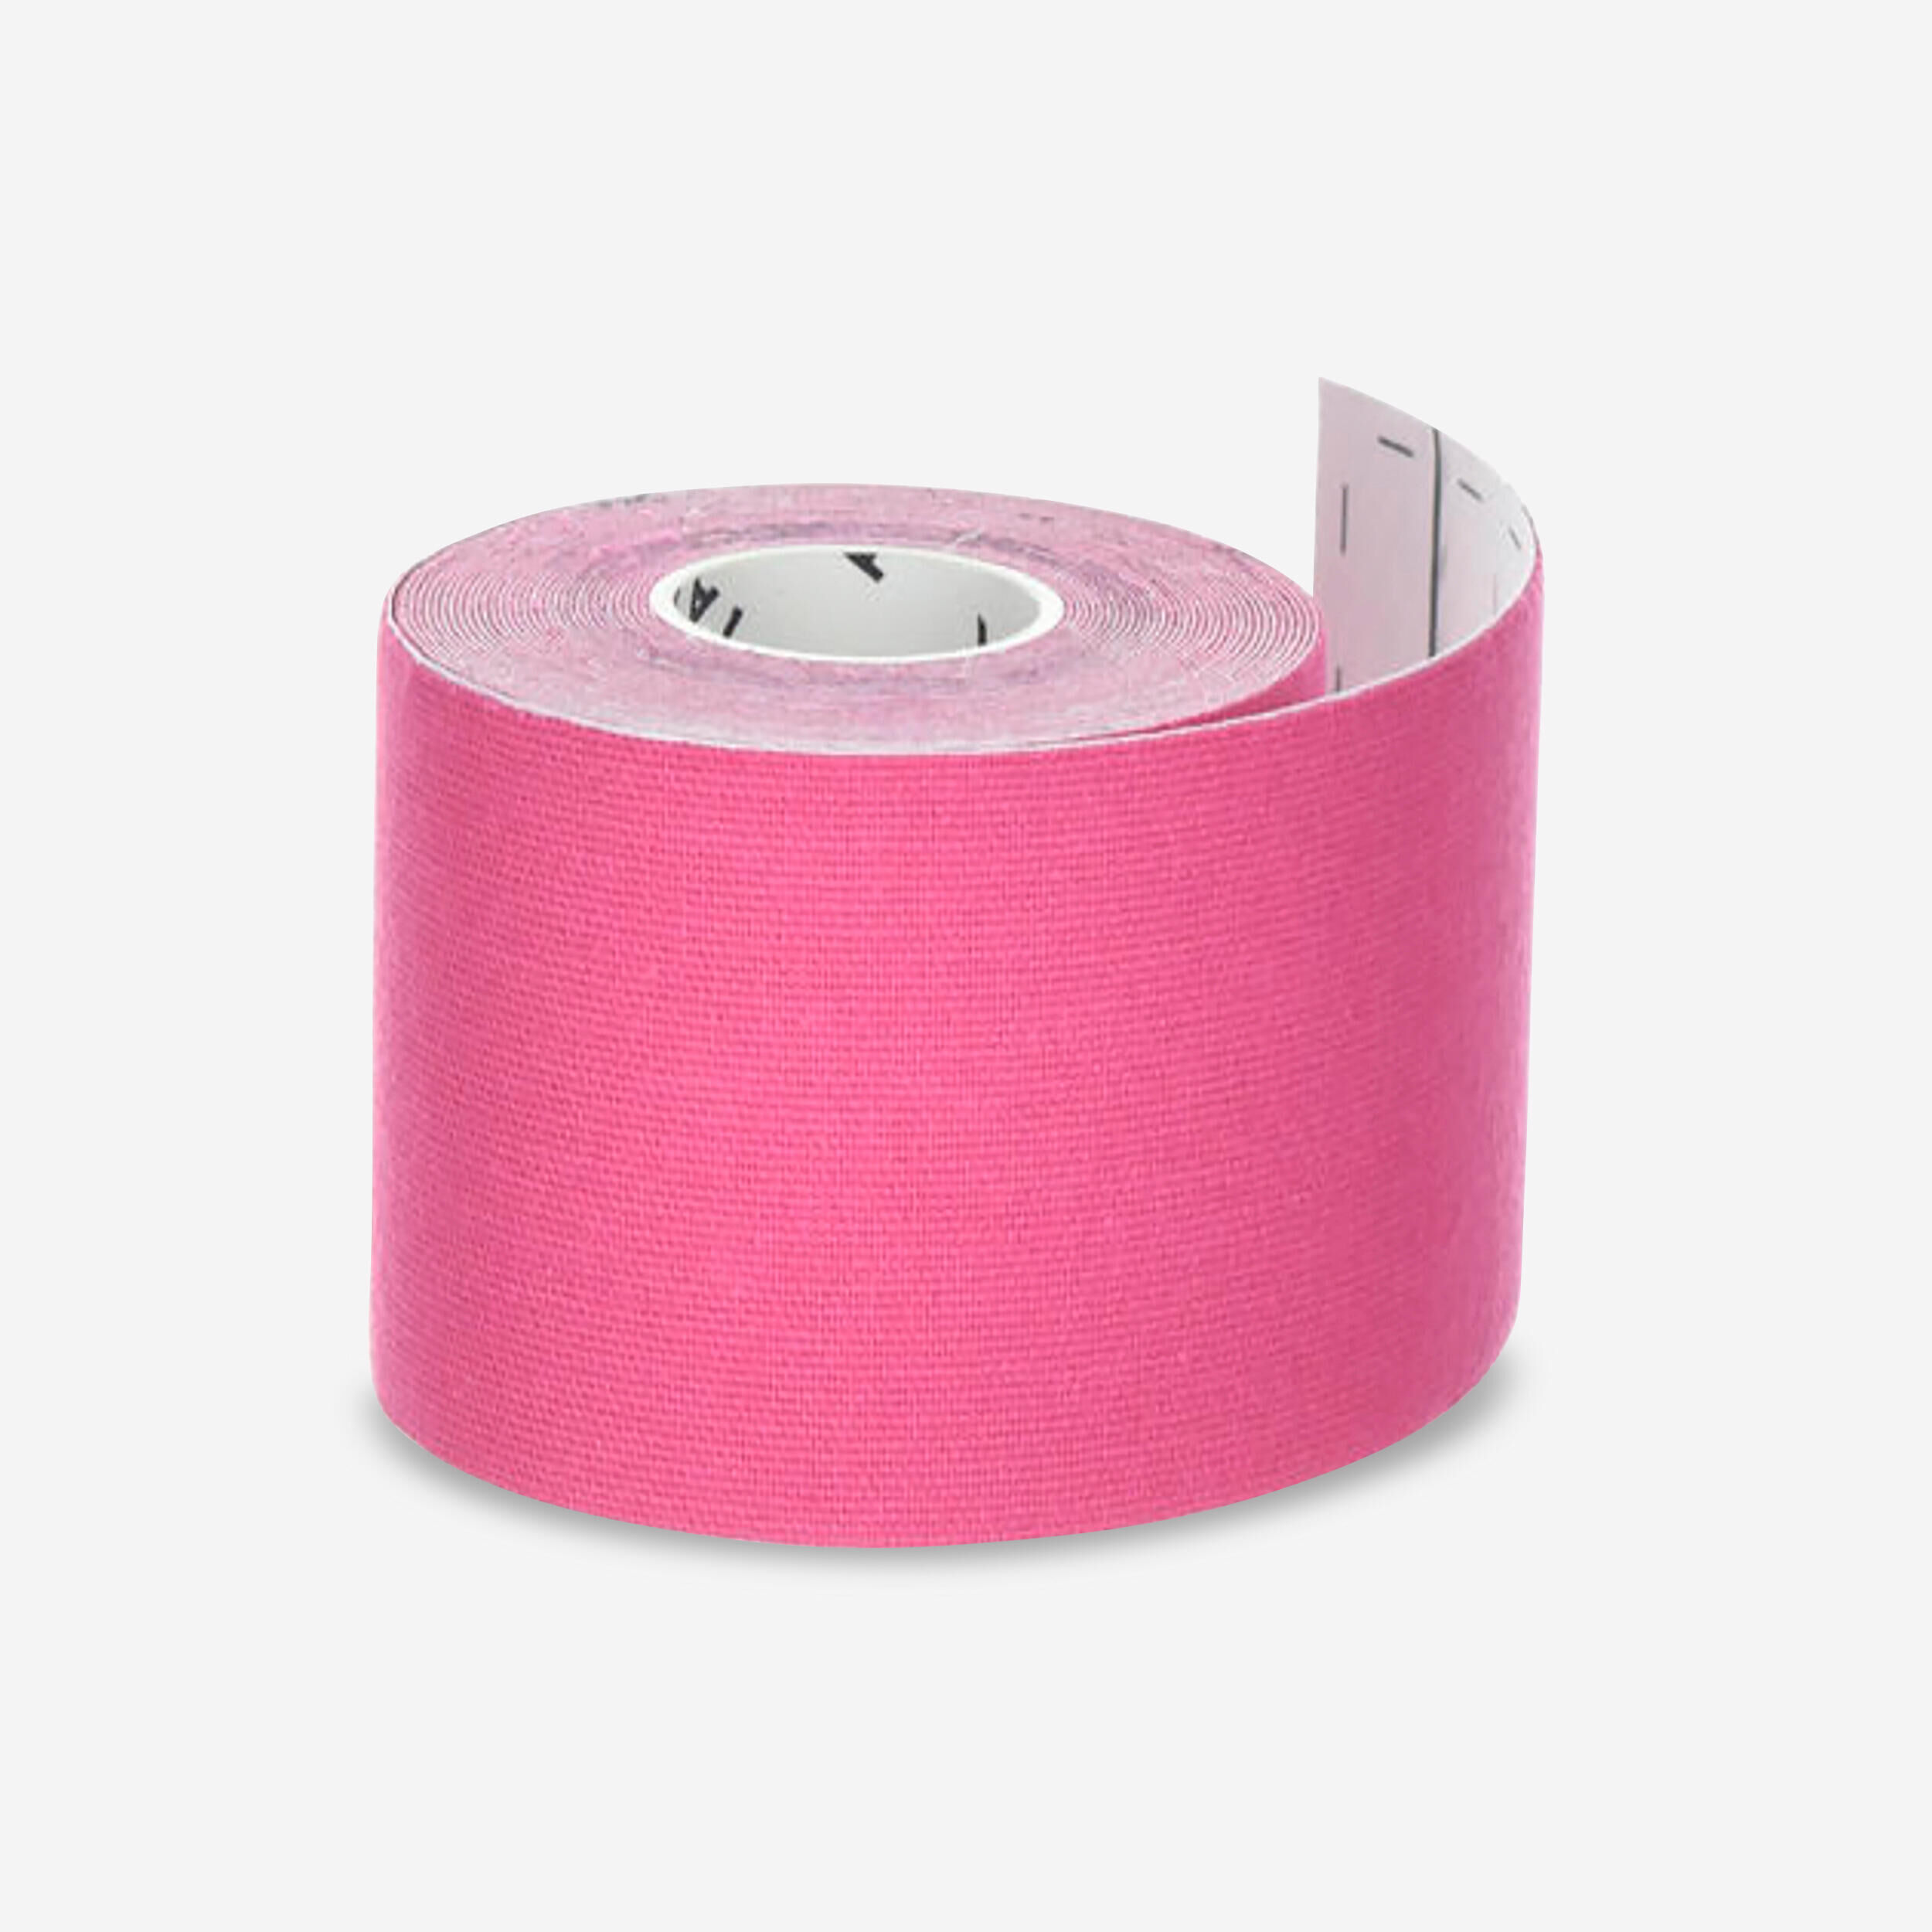 TARMAK 5 cm x 5 m Kinesiology Support Strap - Pink